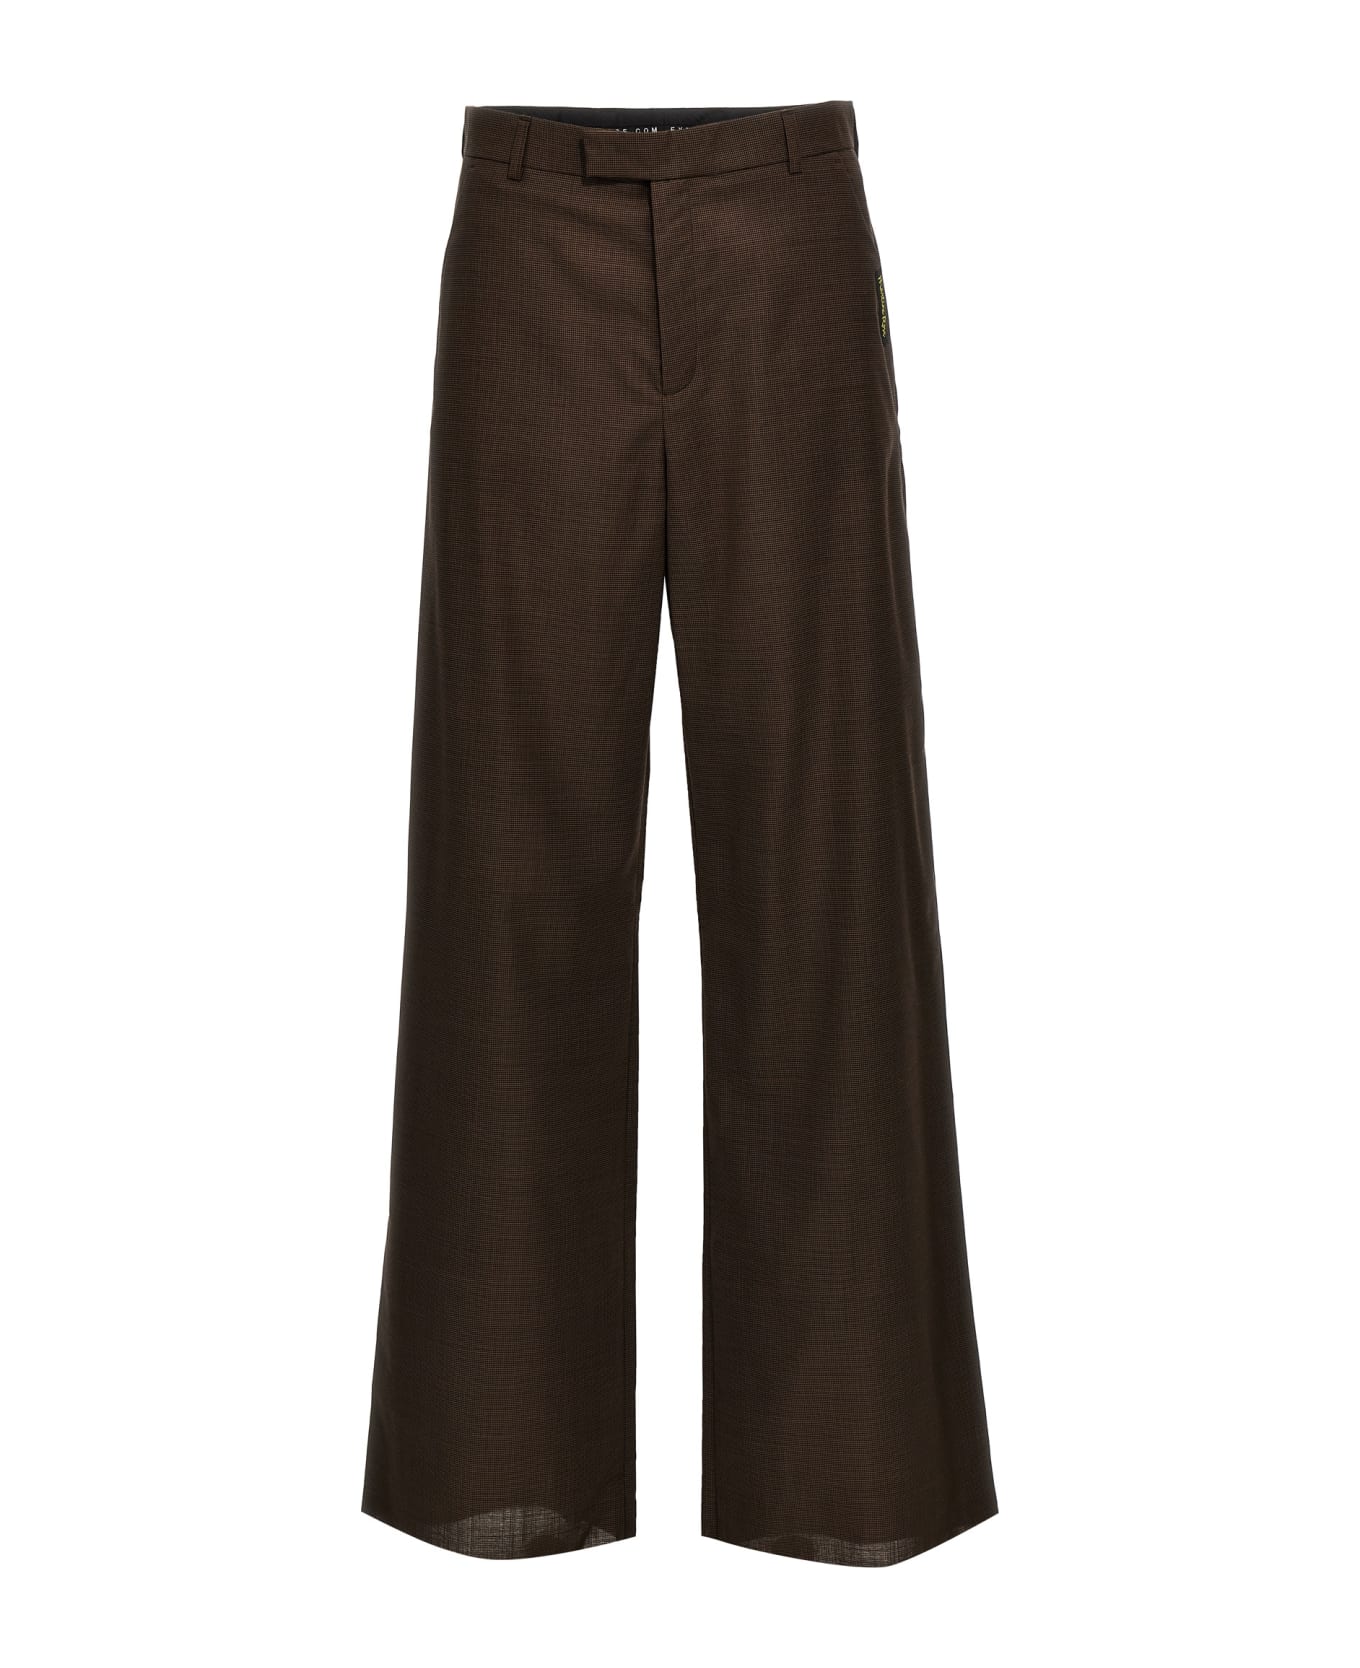 Martine Rose Houndstooth Trousers - Brown